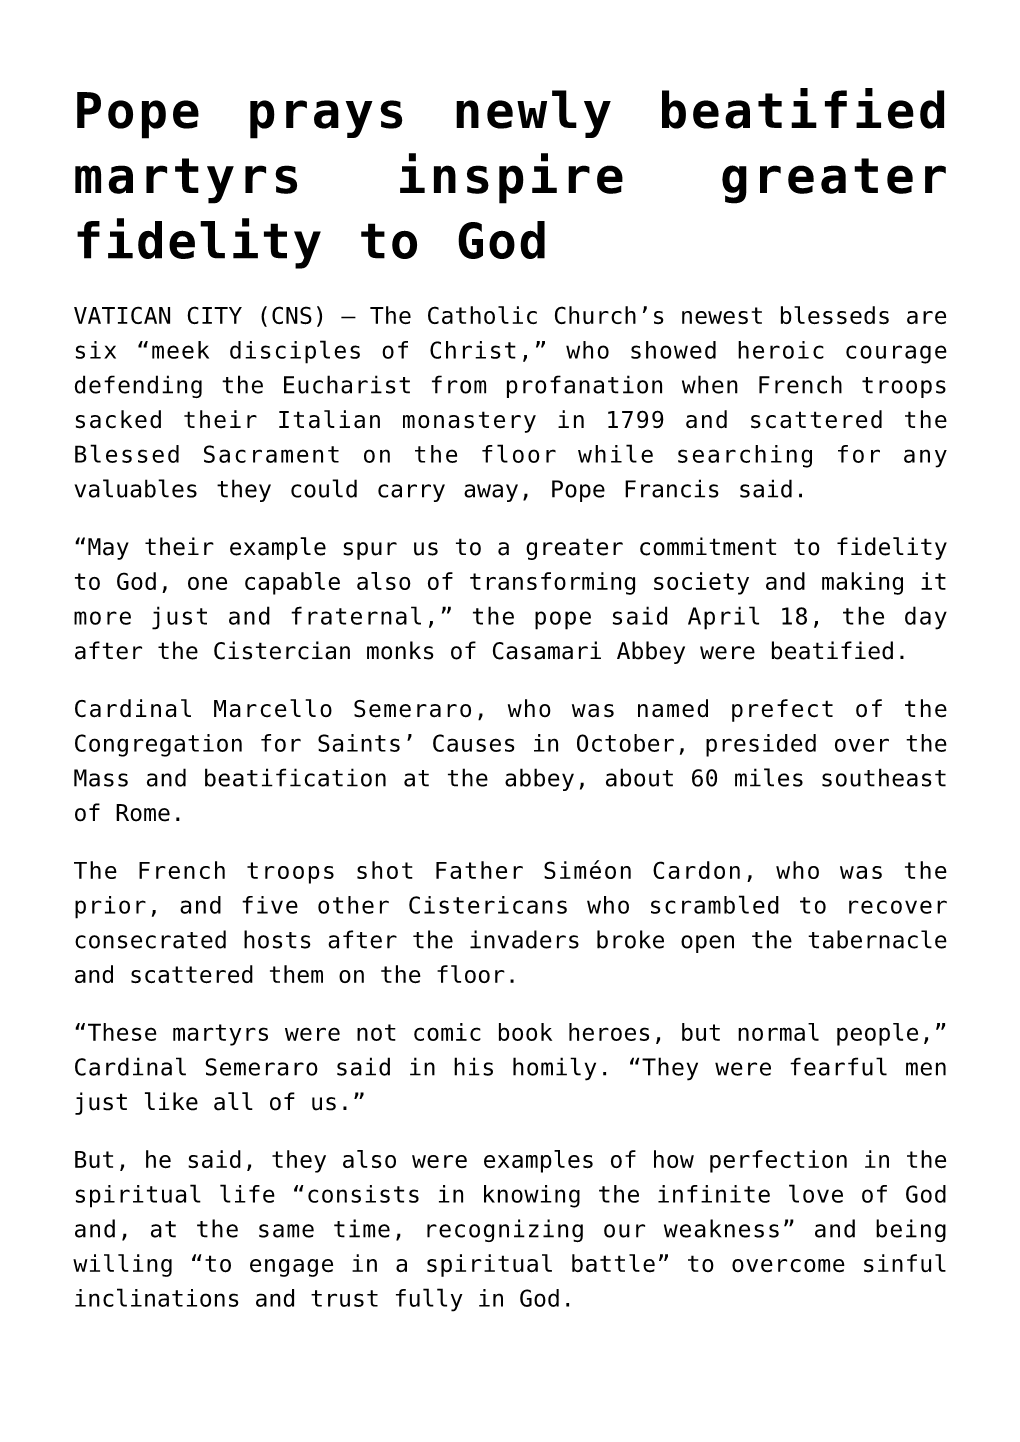 Pope Prays Newly Beatified Martyrs Inspire Greater Fidelity to God